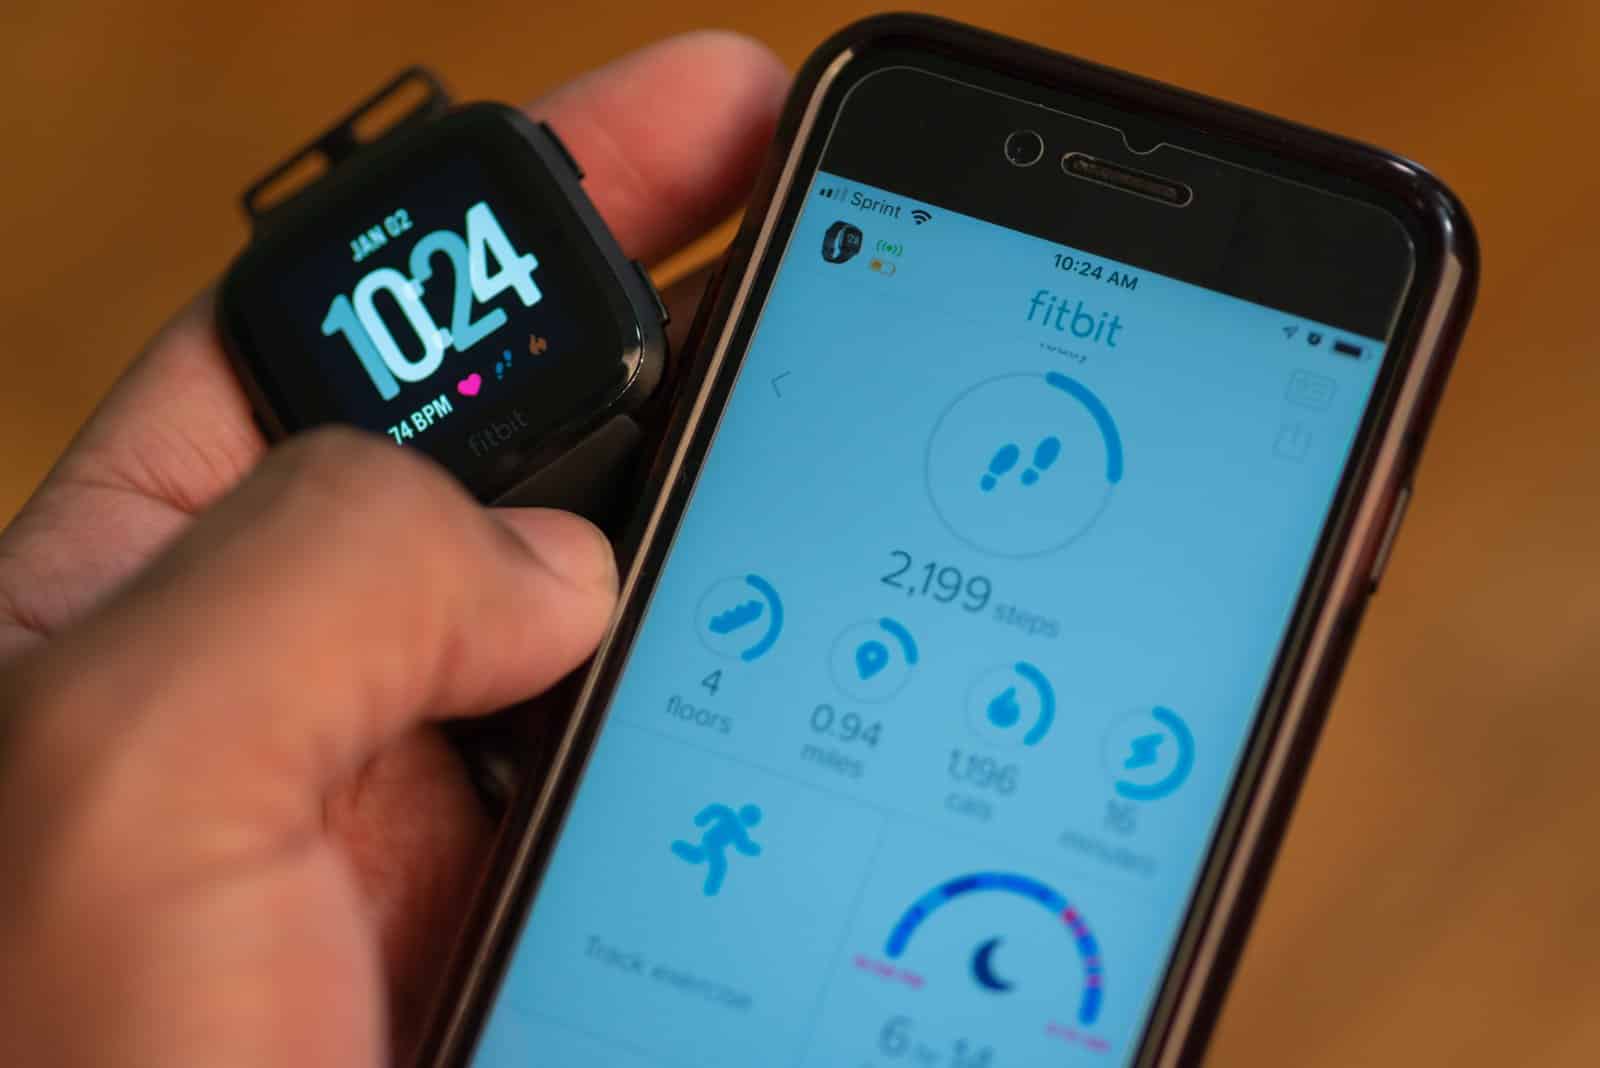 Image Credit: Shutterstock / Rohane Hamilton <p>Fitness trackers monitor physical activity and health. It’s like being their personal trainer and doctor rolled into one.</p>